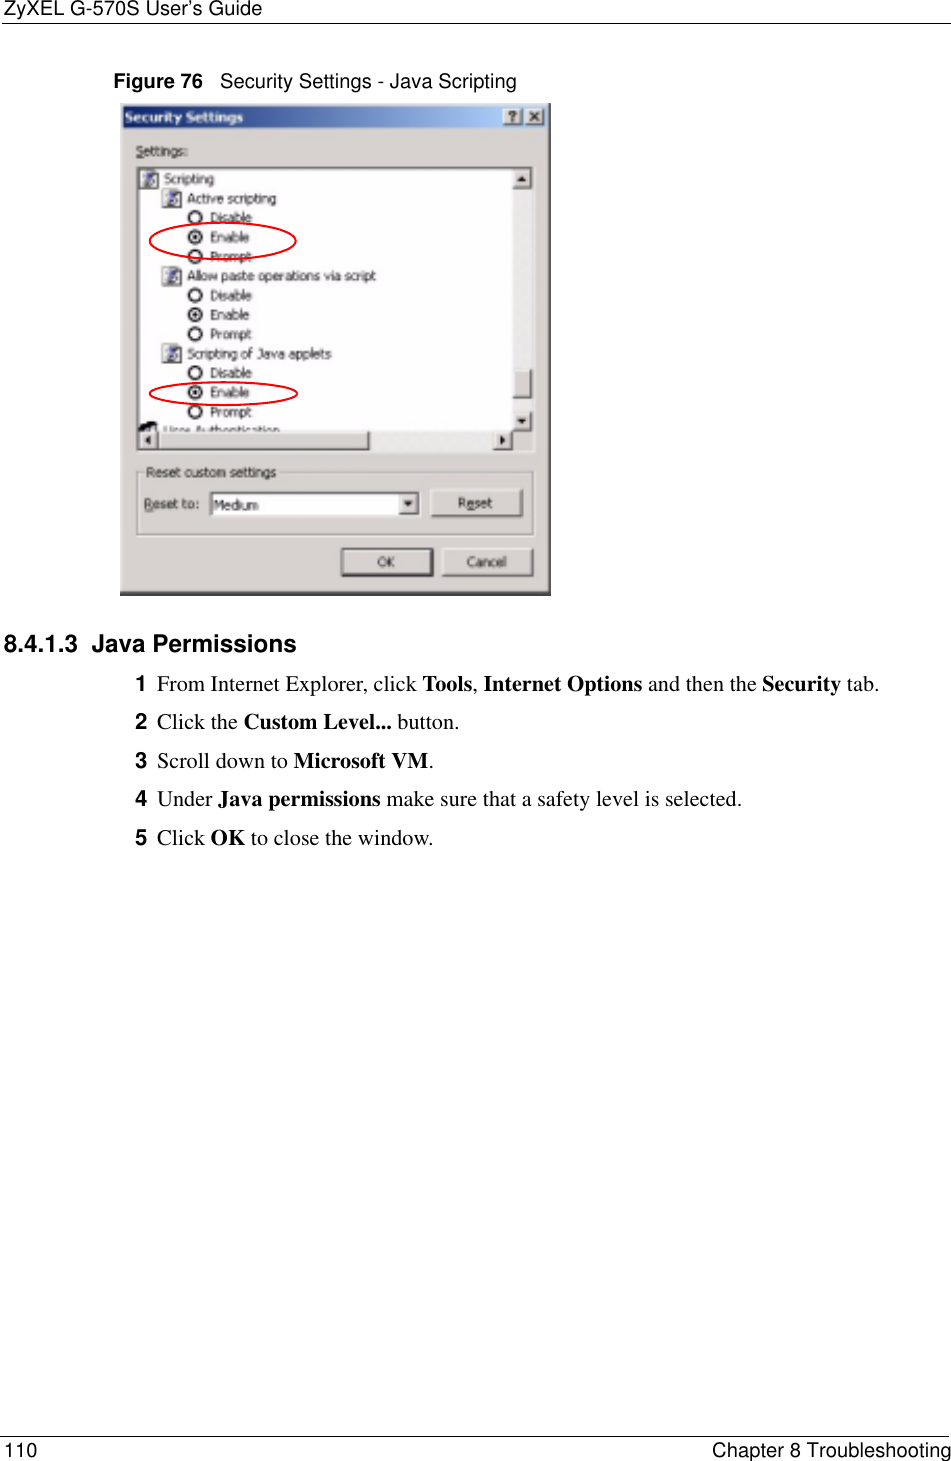 ZyXEL G-570S User’s Guide110 Chapter 8 TroubleshootingFigure 76   Security Settings - Java Scripting8.4.1.3  Java Permissions1From Internet Explorer, click Tools,Internet Options and then the Security tab. 2Click the Custom Level... button. 3Scroll down to Microsoft VM.4Under Java permissions make sure that a safety level is selected.5Click OK to close the window.